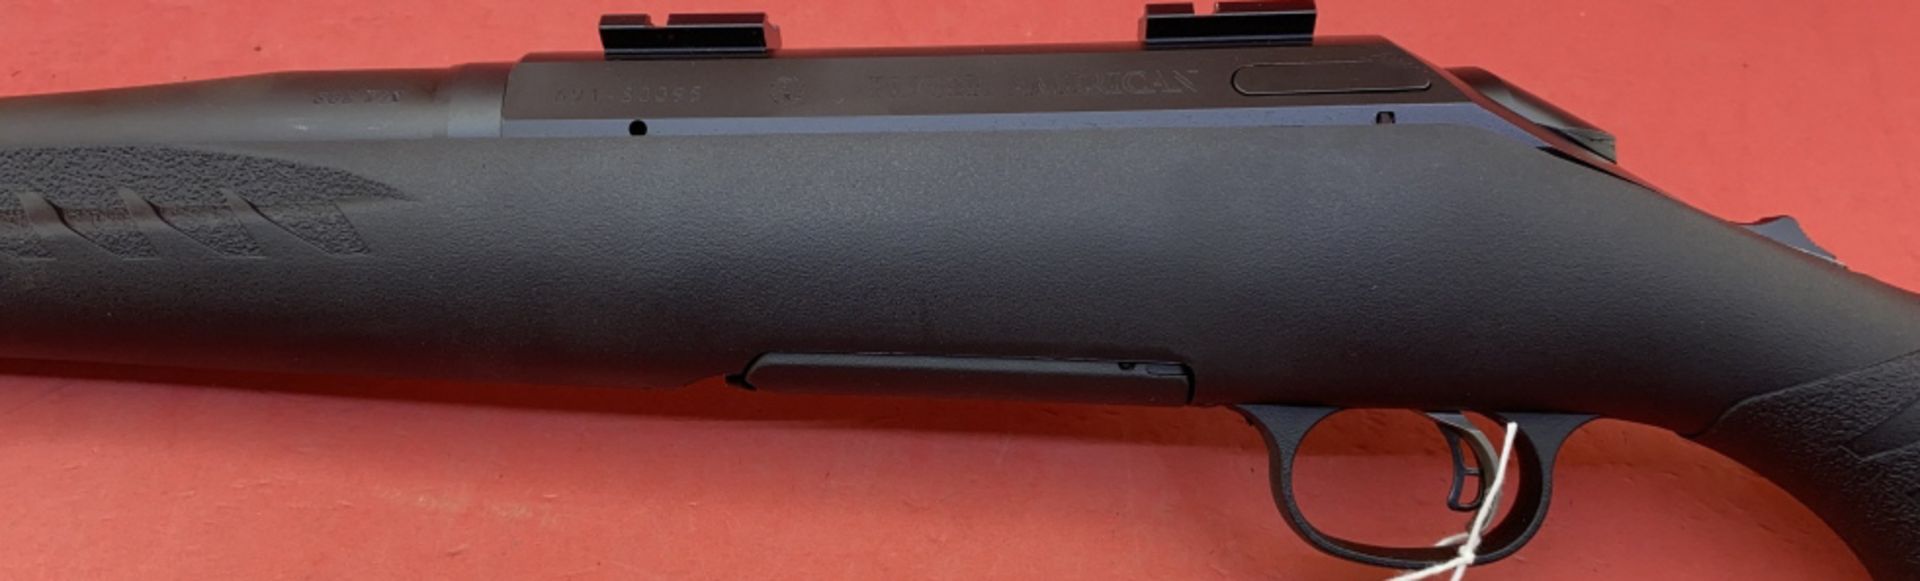 Ruger American Rifle .308 Rifle - Image 8 of 9